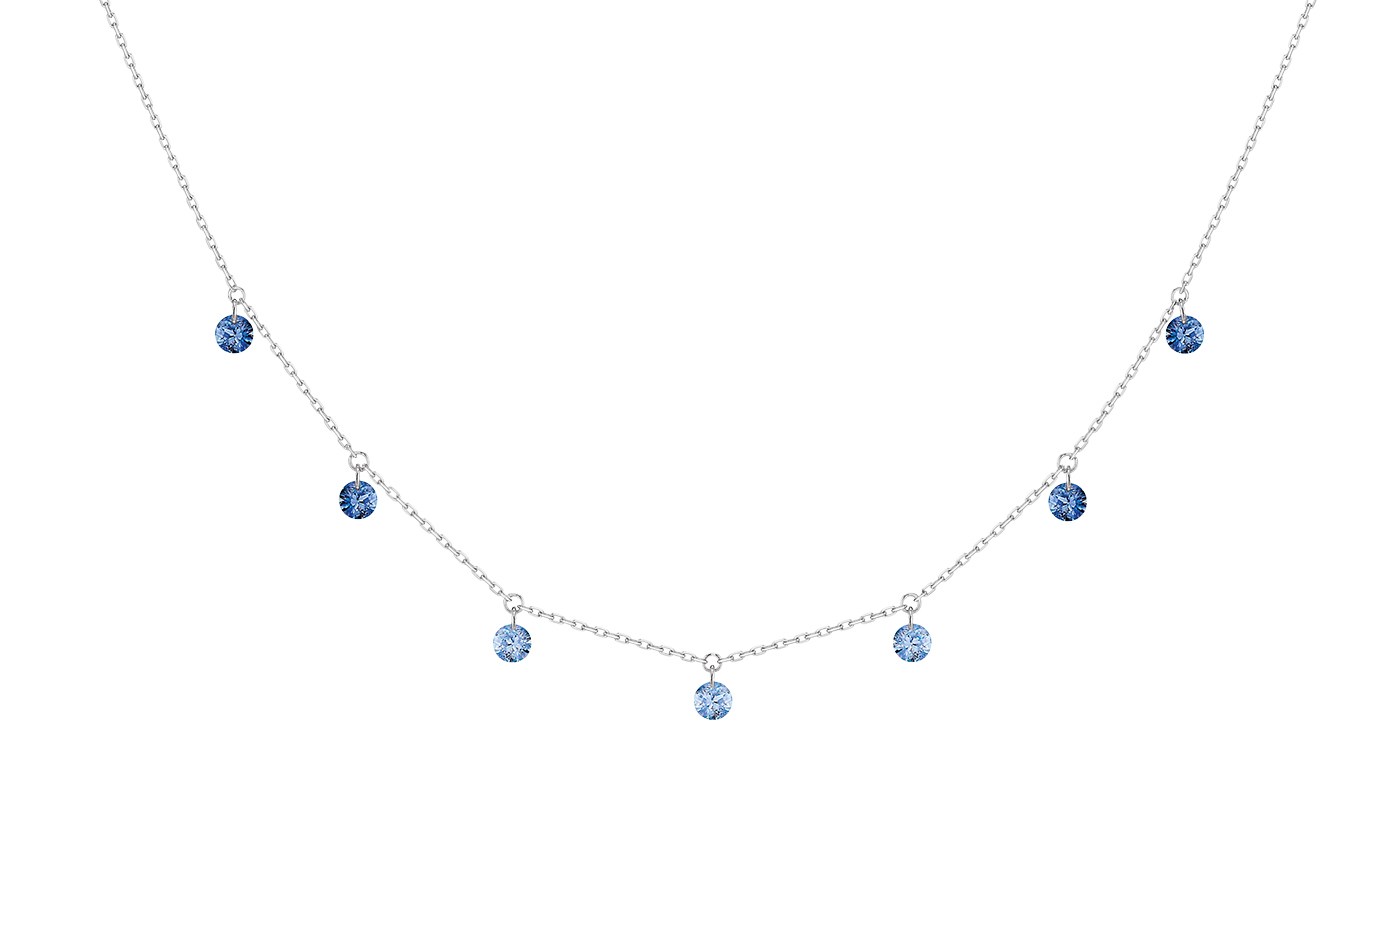 Collier CONFETTI BLEU, 7 pierres, poids total 0,90 ct approx., or blanc 18KT, 1gr.